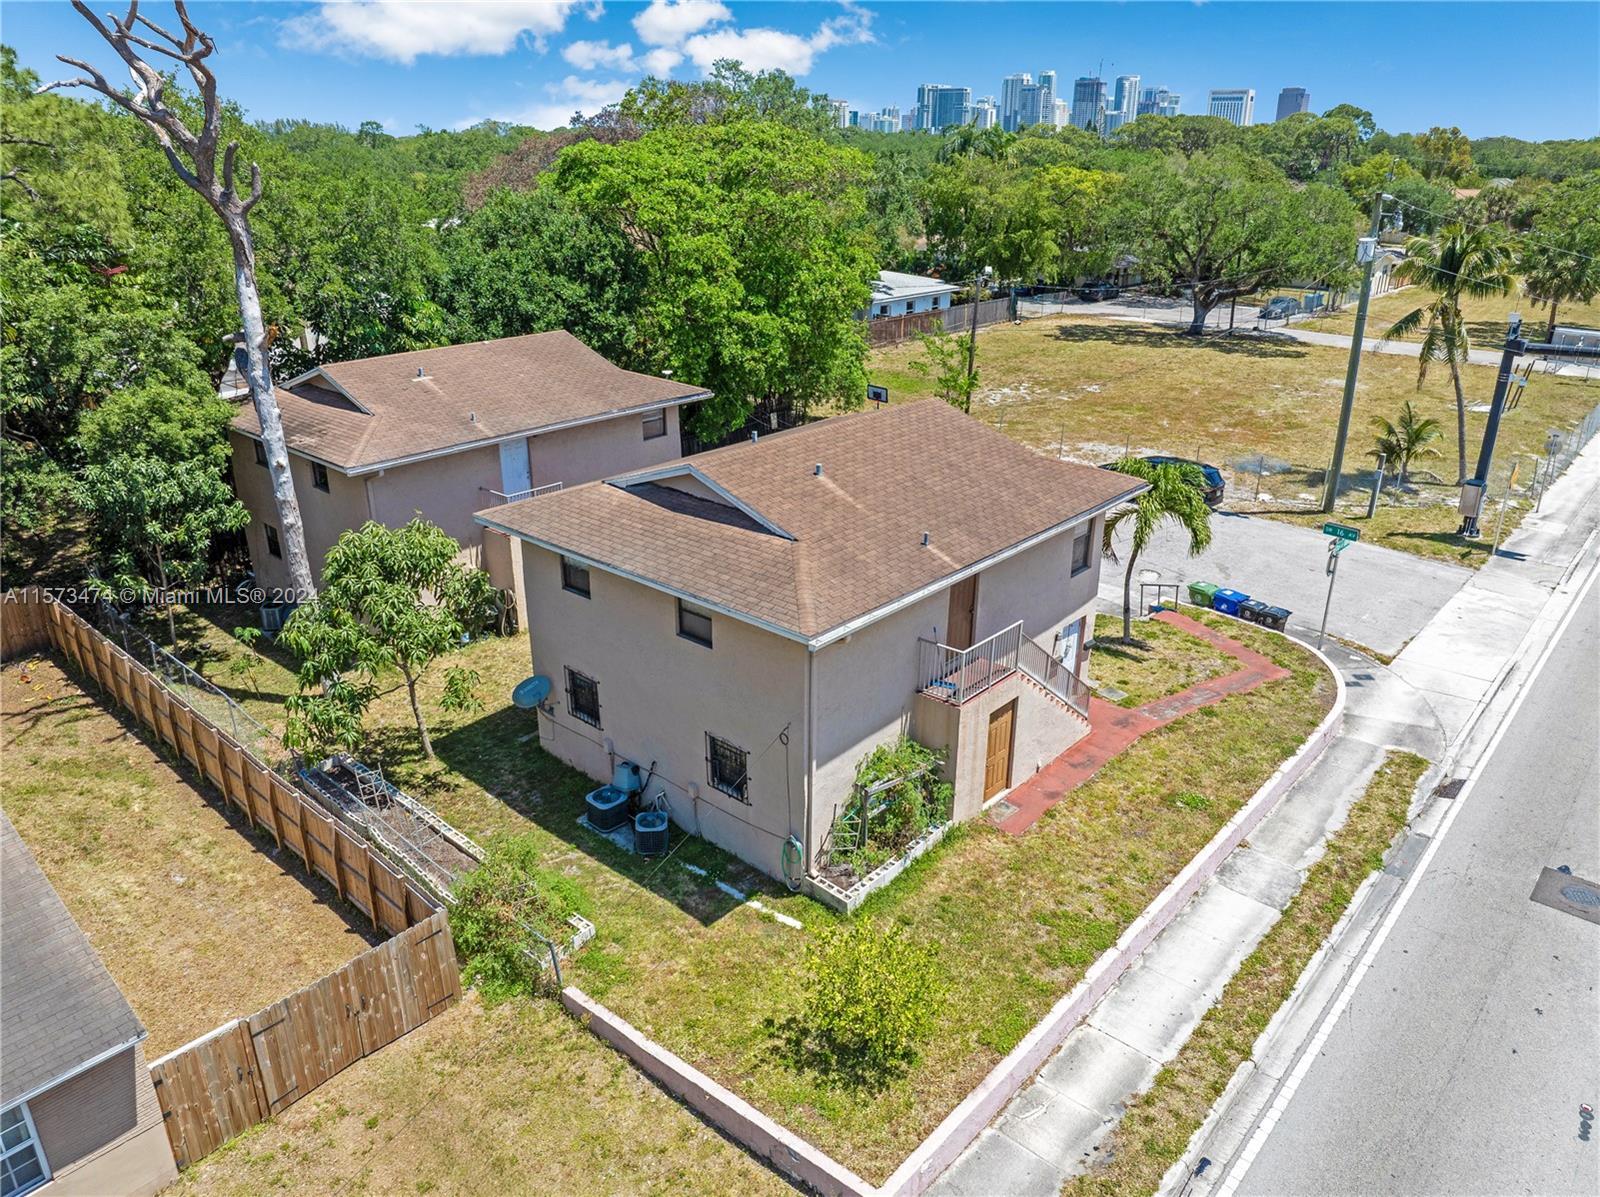 Excellent investment opportunity in Fort Lauderdale with this multifamily with two independent build